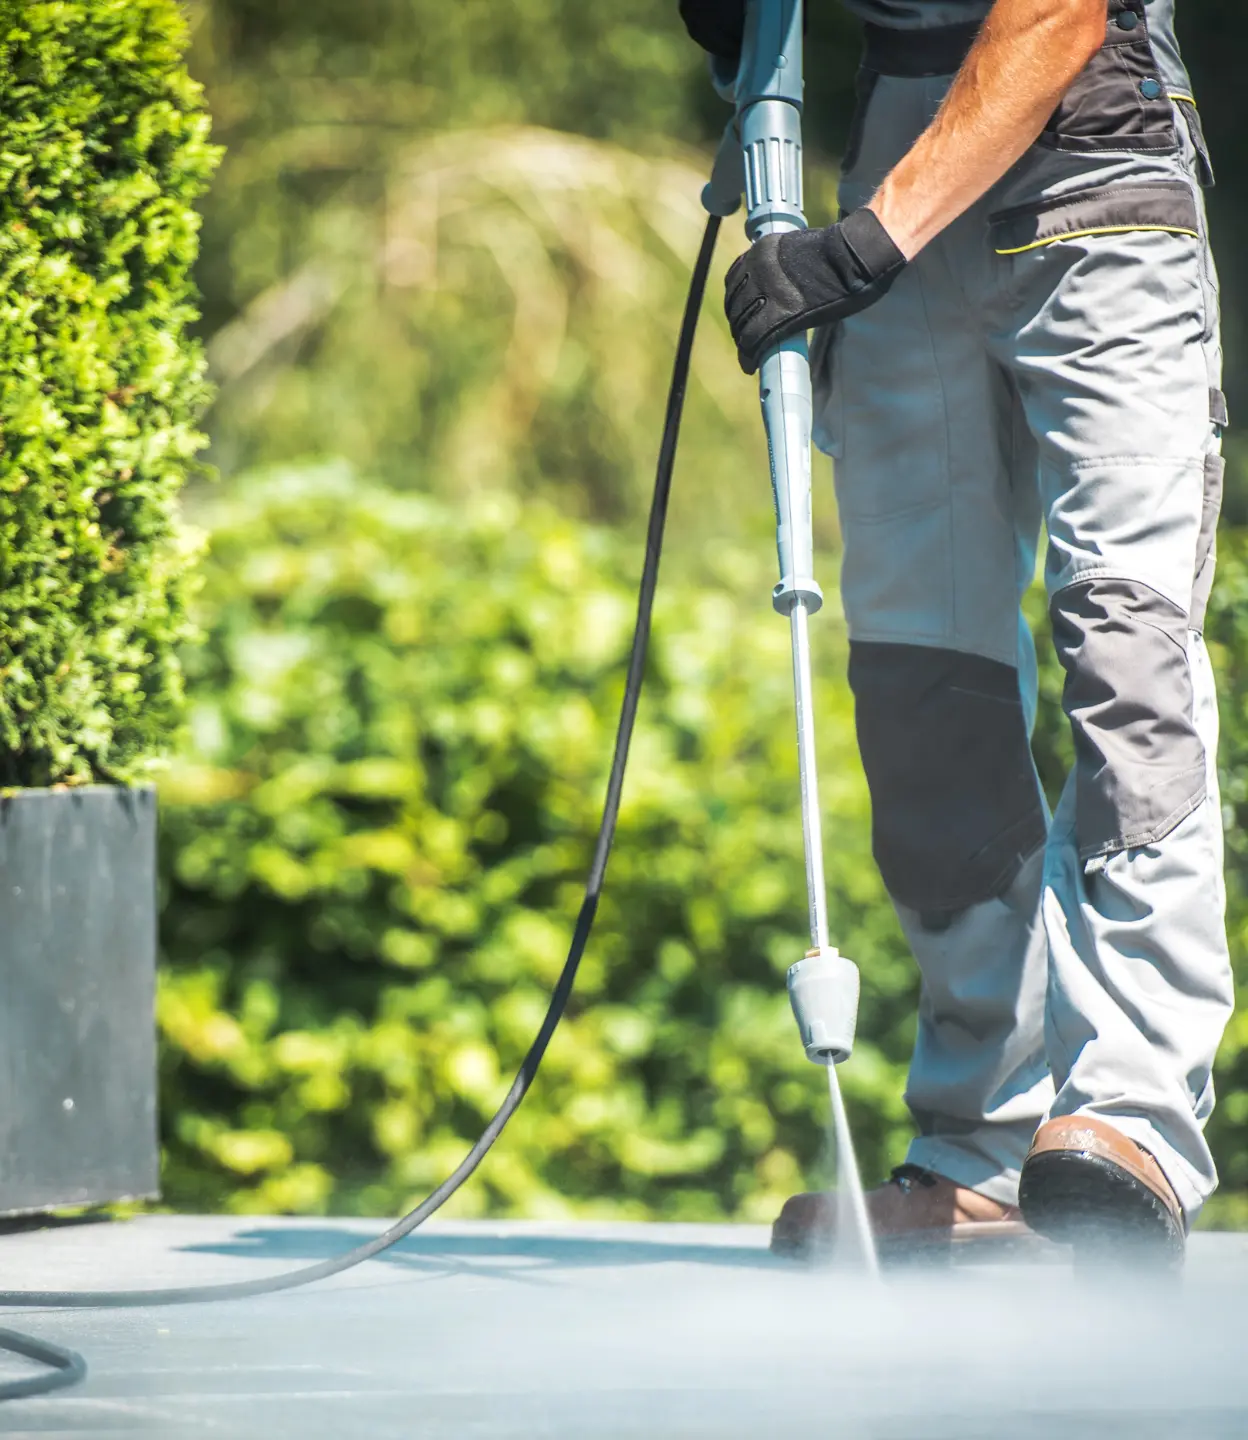 Kosomax Power Wash's professional cleaning services in St. Louis - removing dirt, grime, and stains from any surface with powerful and effective eco-friendly solutions.